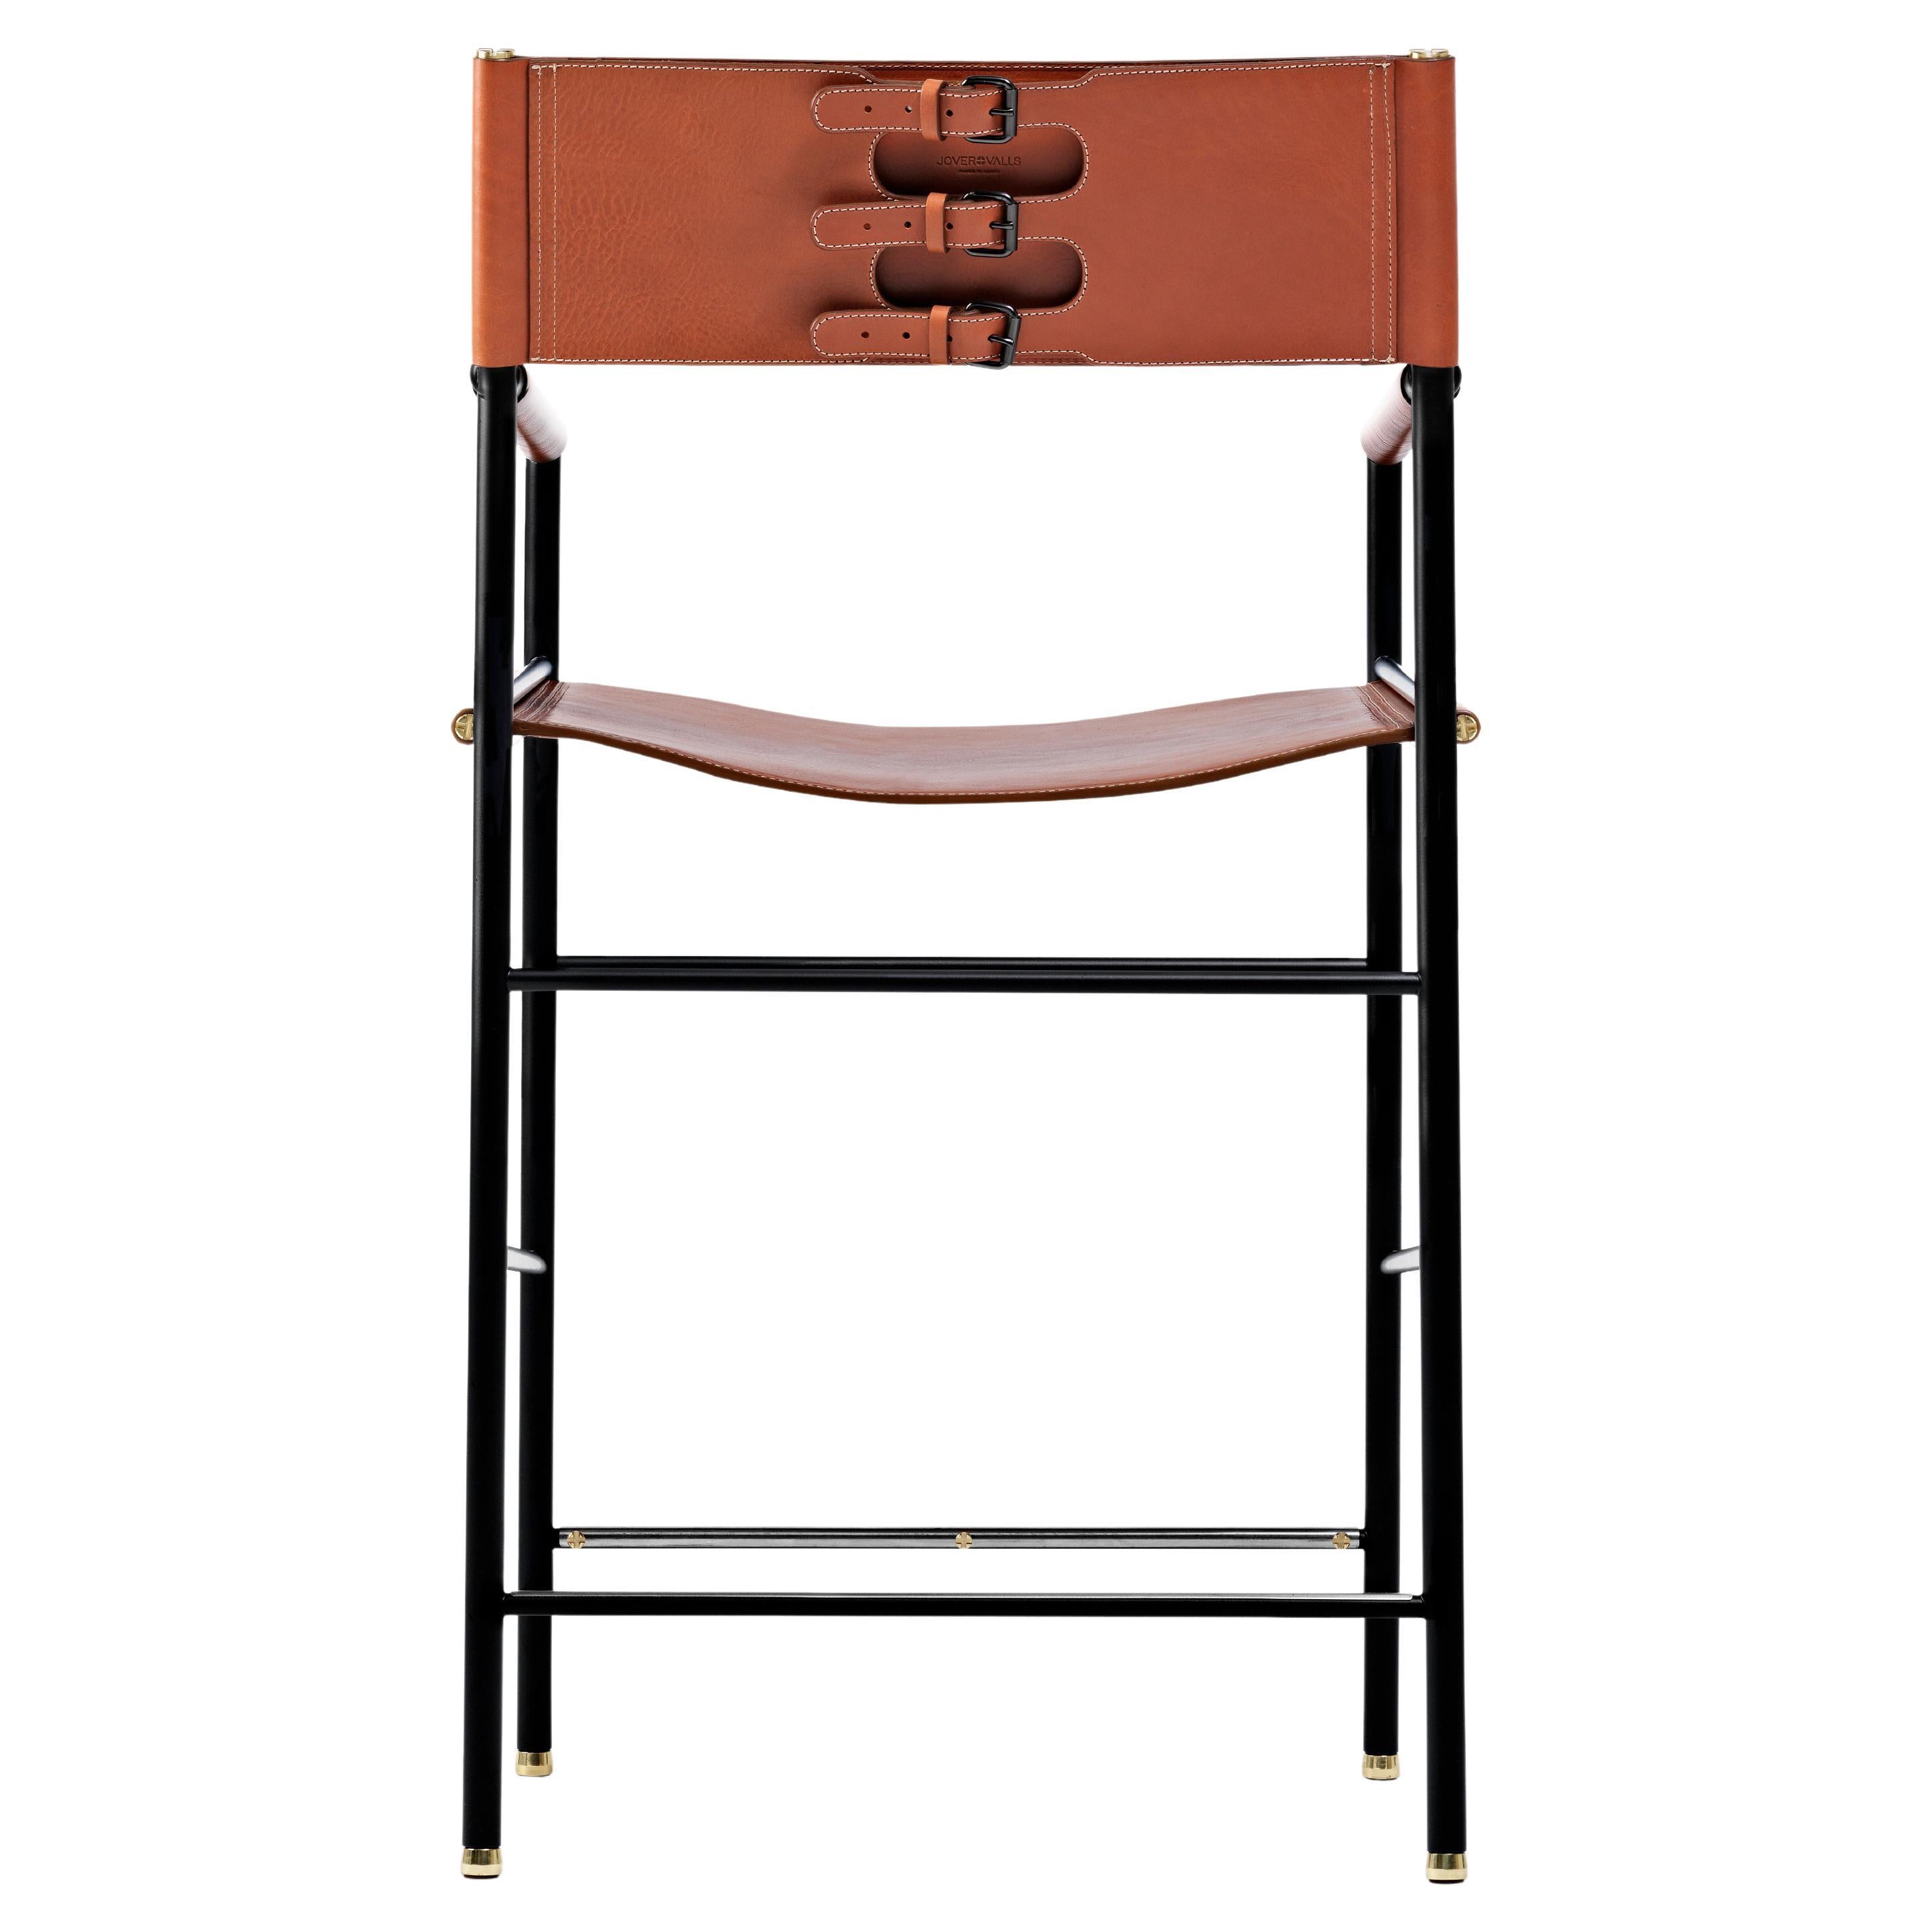 Classic Contemporary Barstool w Backrest Natural Tan Leather, Black Rubber Metal